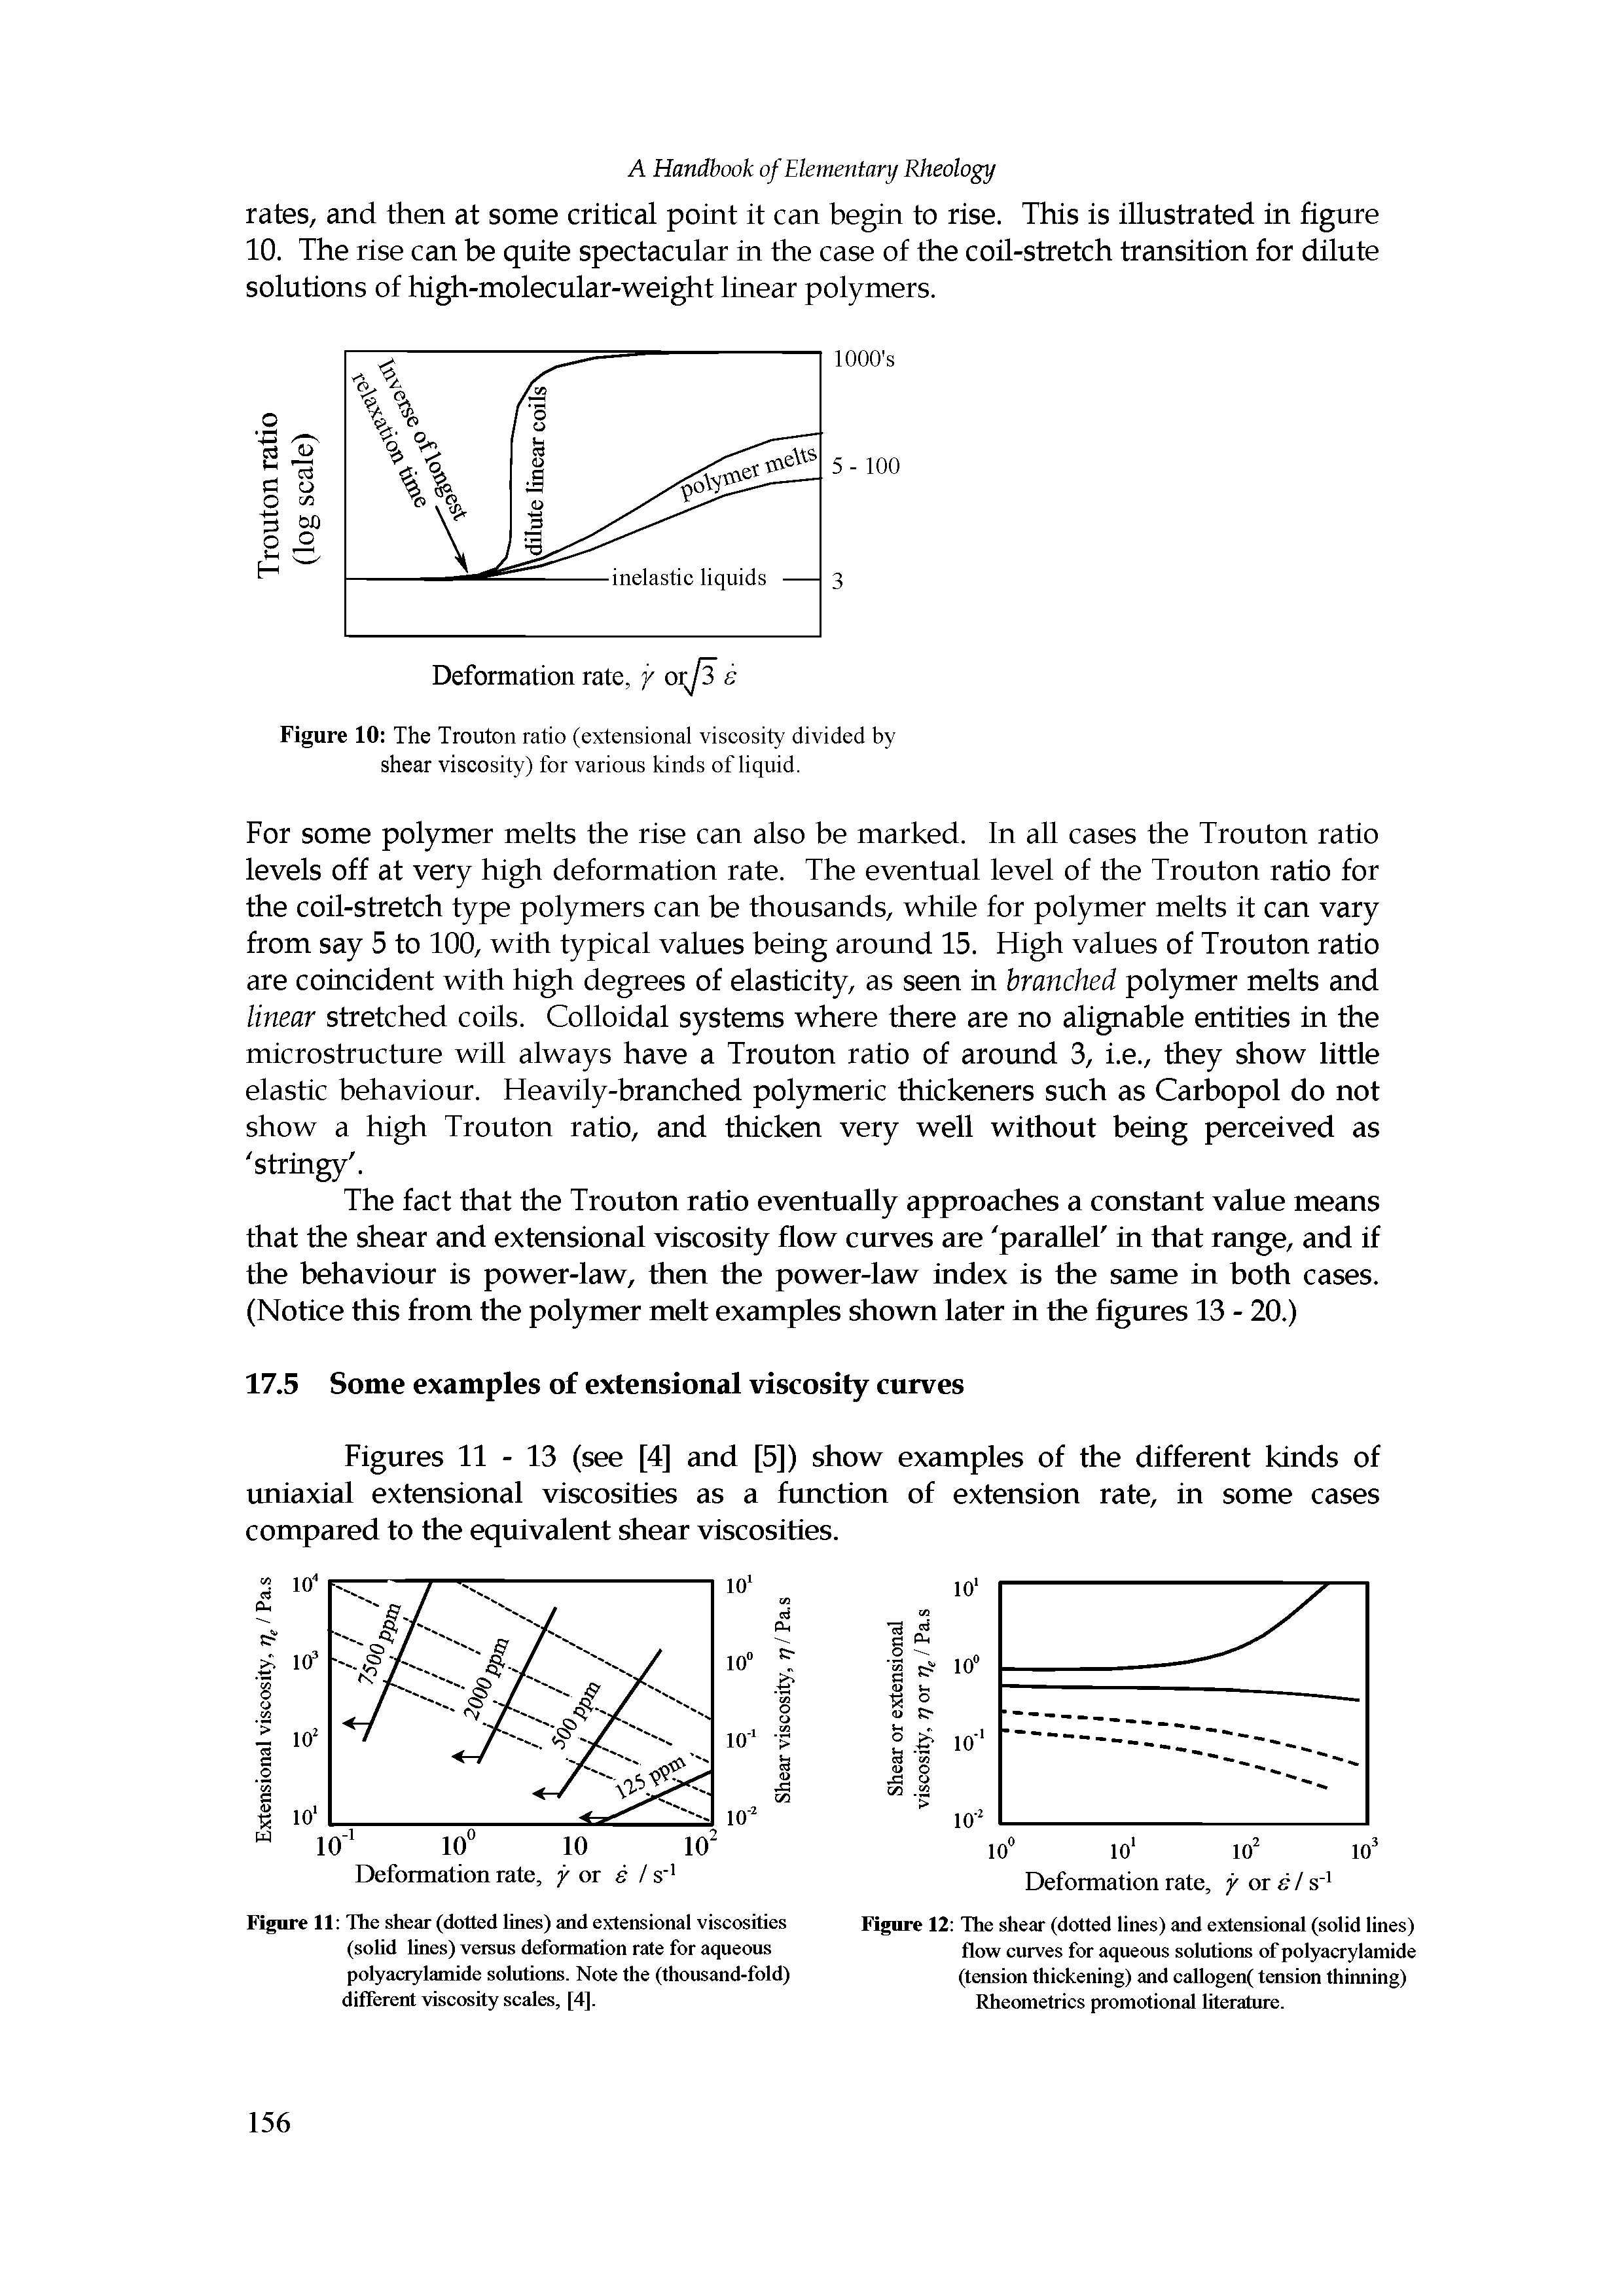 Figure 12 The shear (dotted lines) and extensional (solid lines) flow curves for aqueous solutions of polyacrylamide (tension thickening) and callogen( tension thinning) Rheometrics promotional literature.